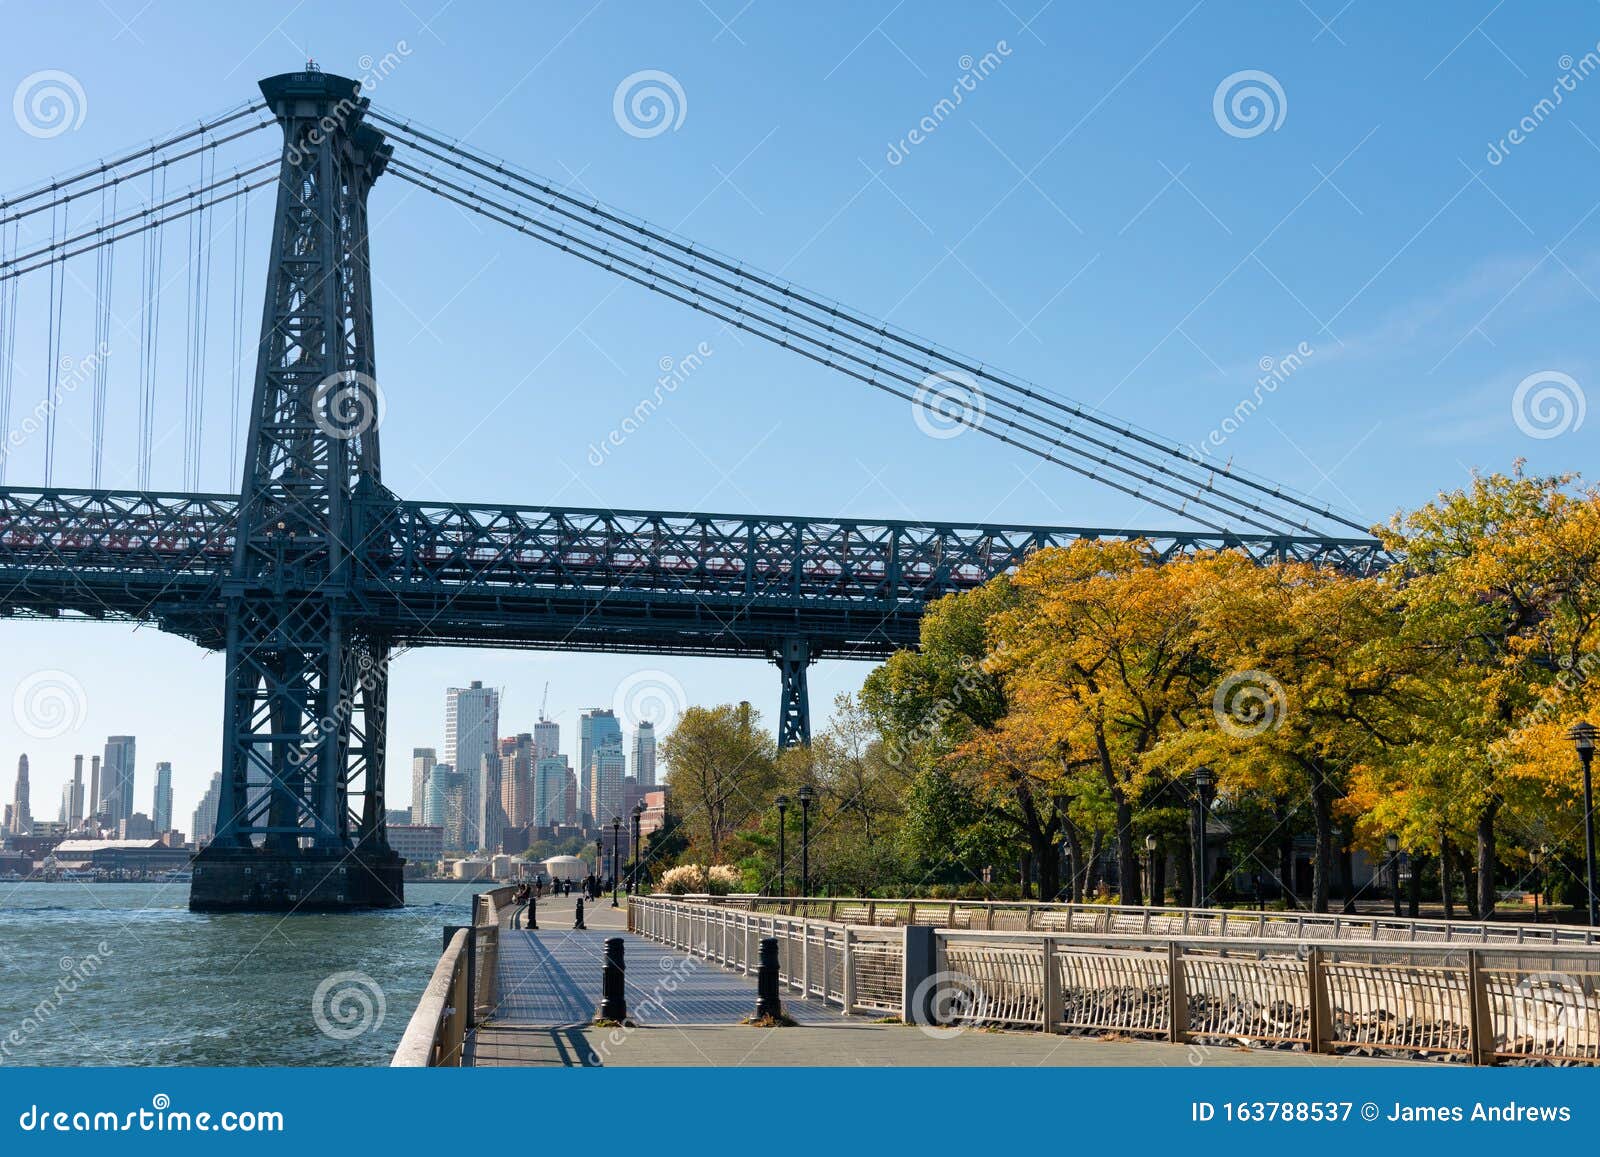 Walkway Along the East River Park by the Williamsburg Bridge on the ...